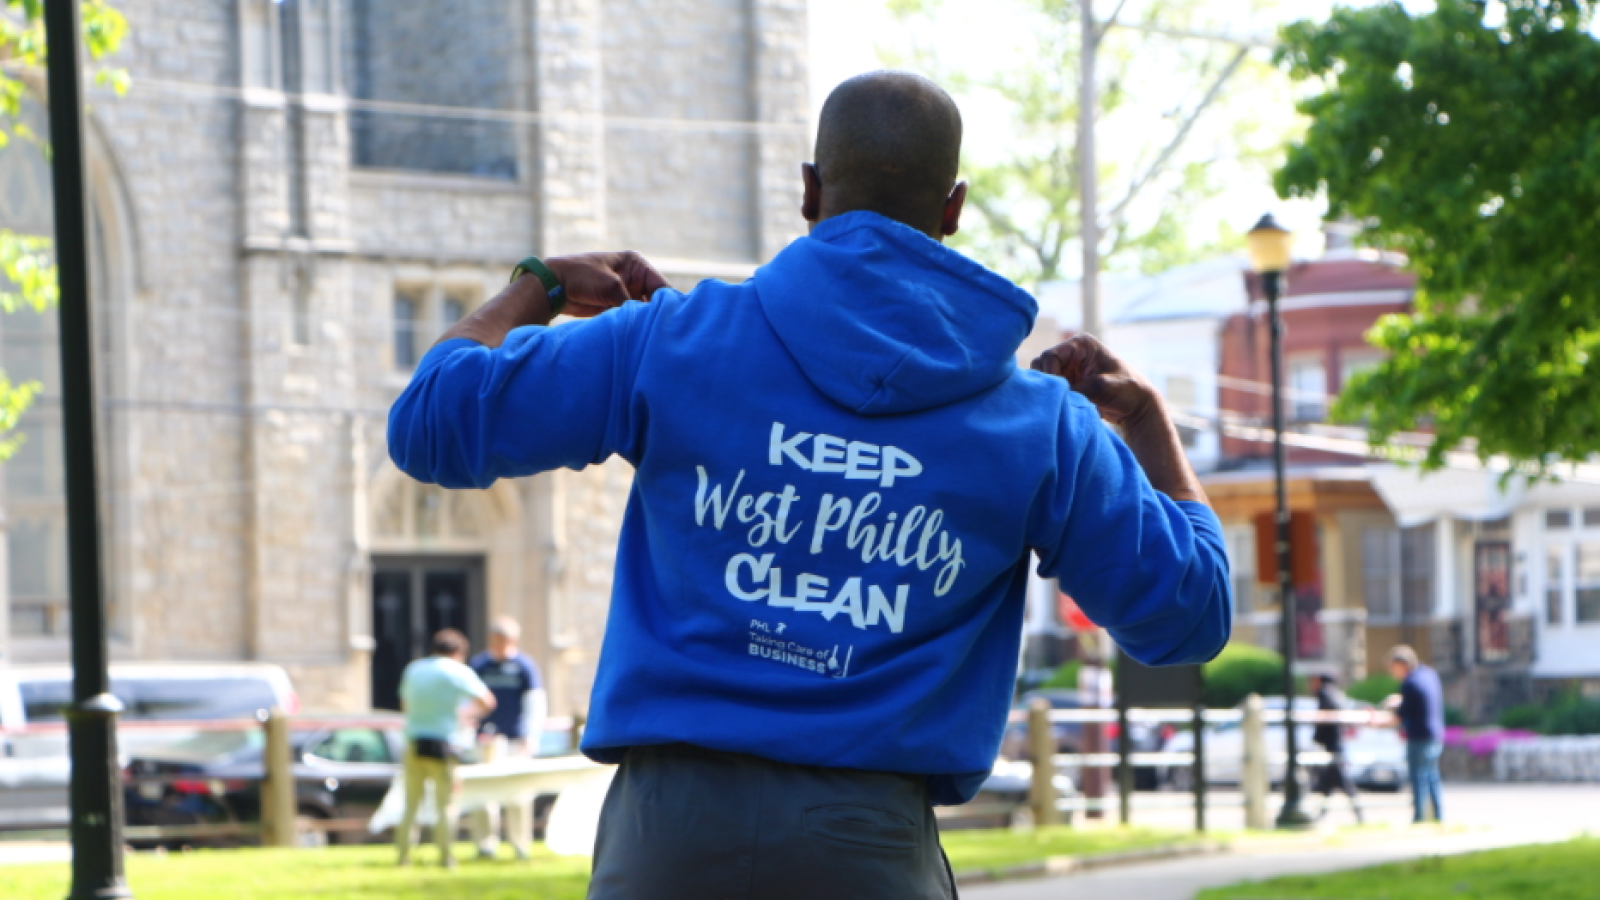 Keep West Philly Clean